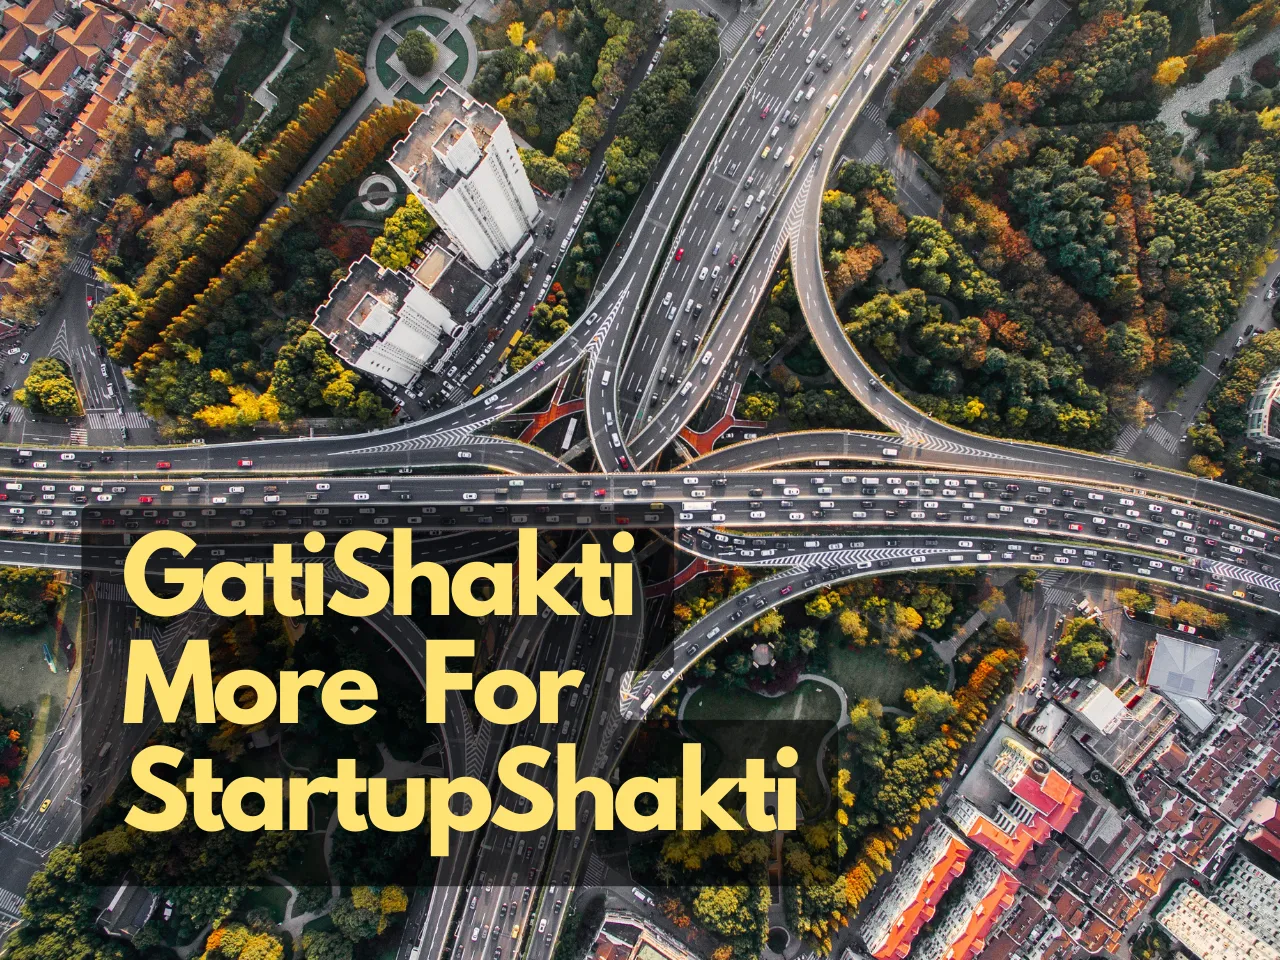 Small Town Startup Growth Poised for Transformation: GatiShakti Impact